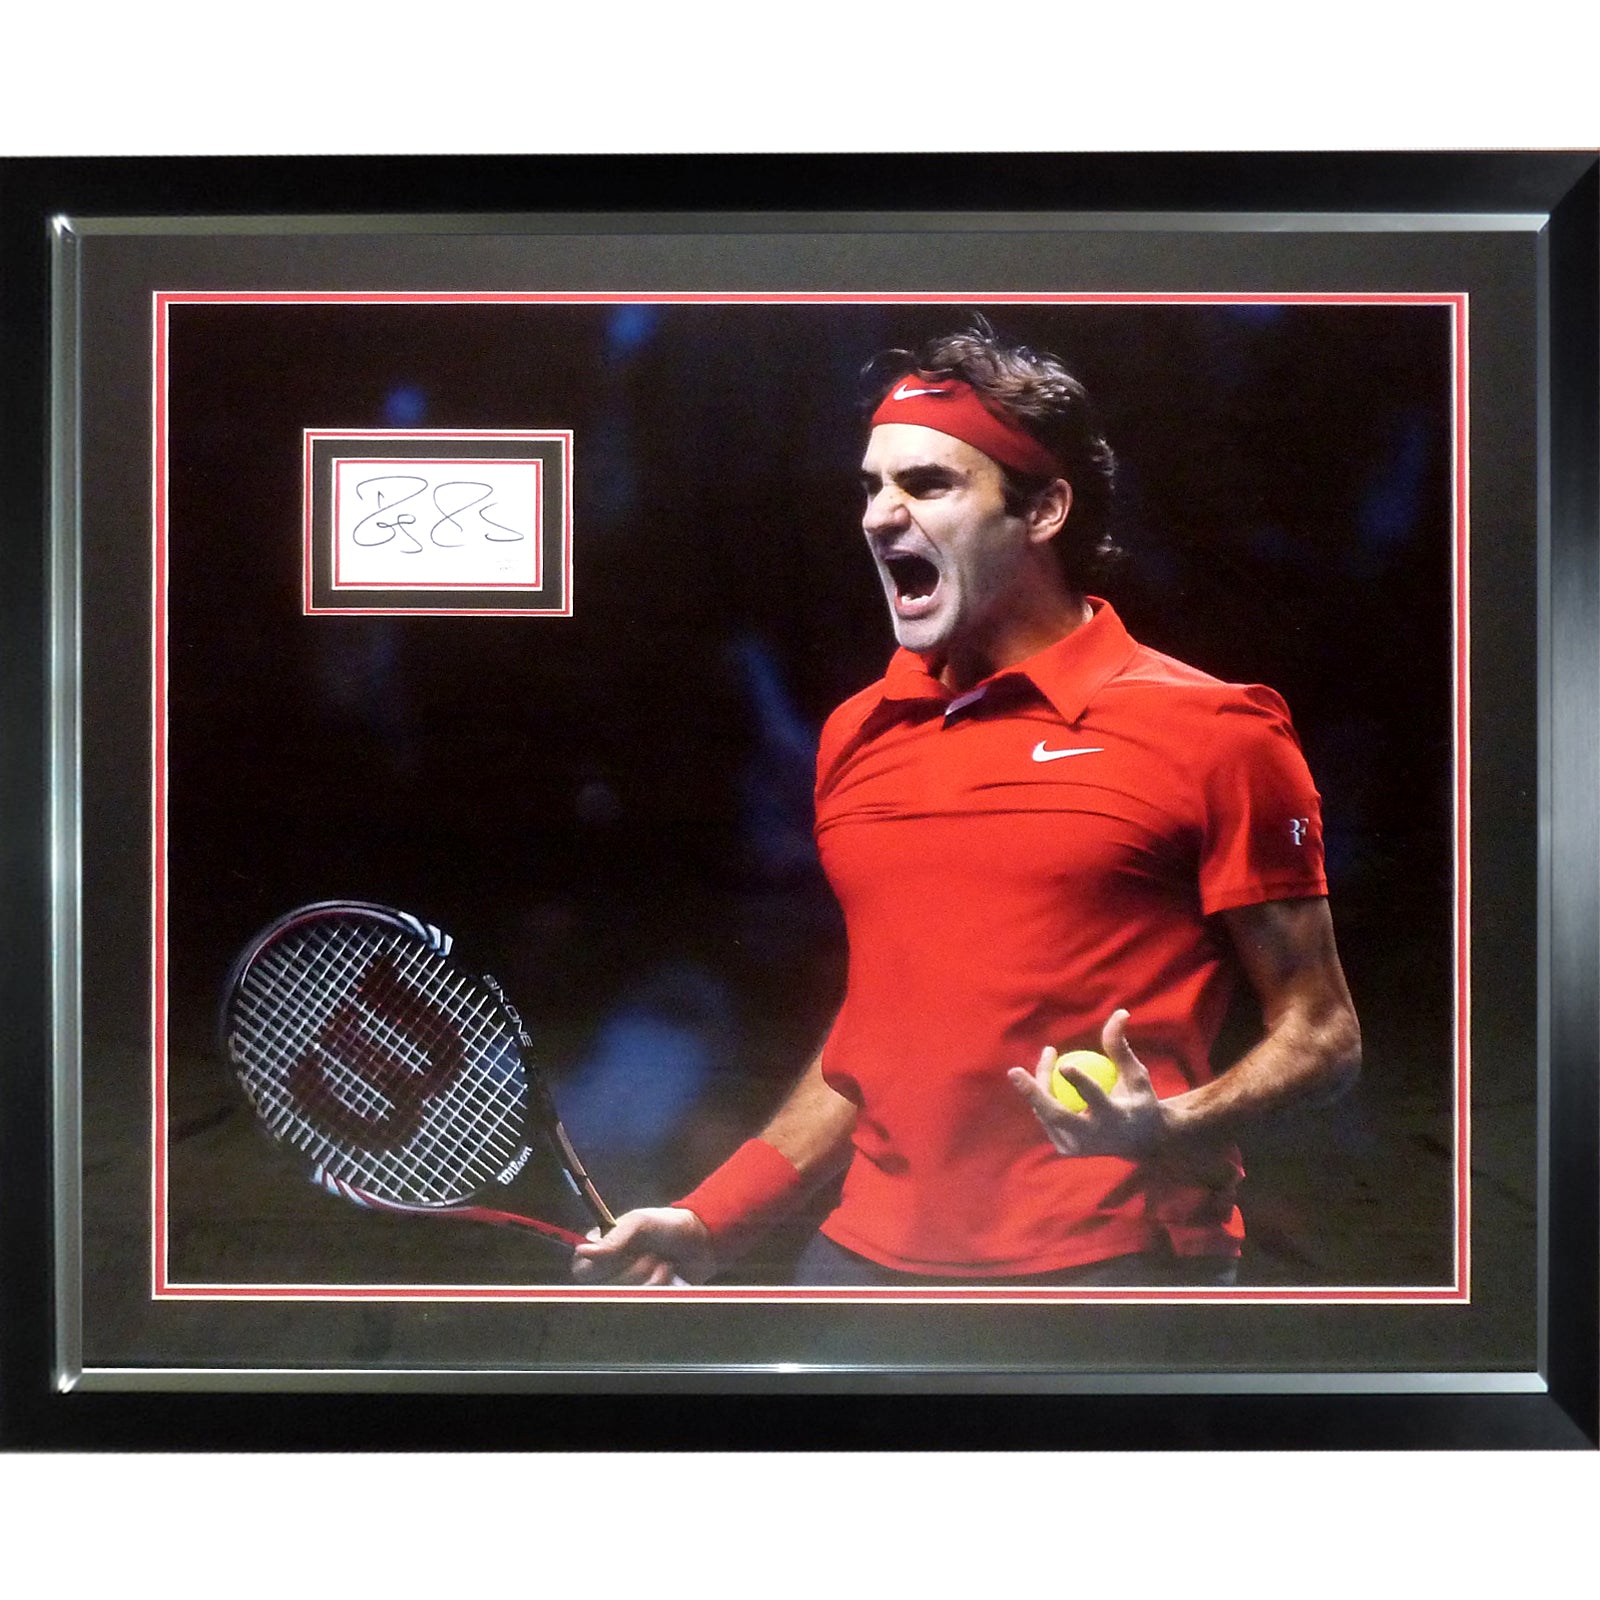 Roger Federer Autograph Deluxe Framed with Full-Size Tennis Poster